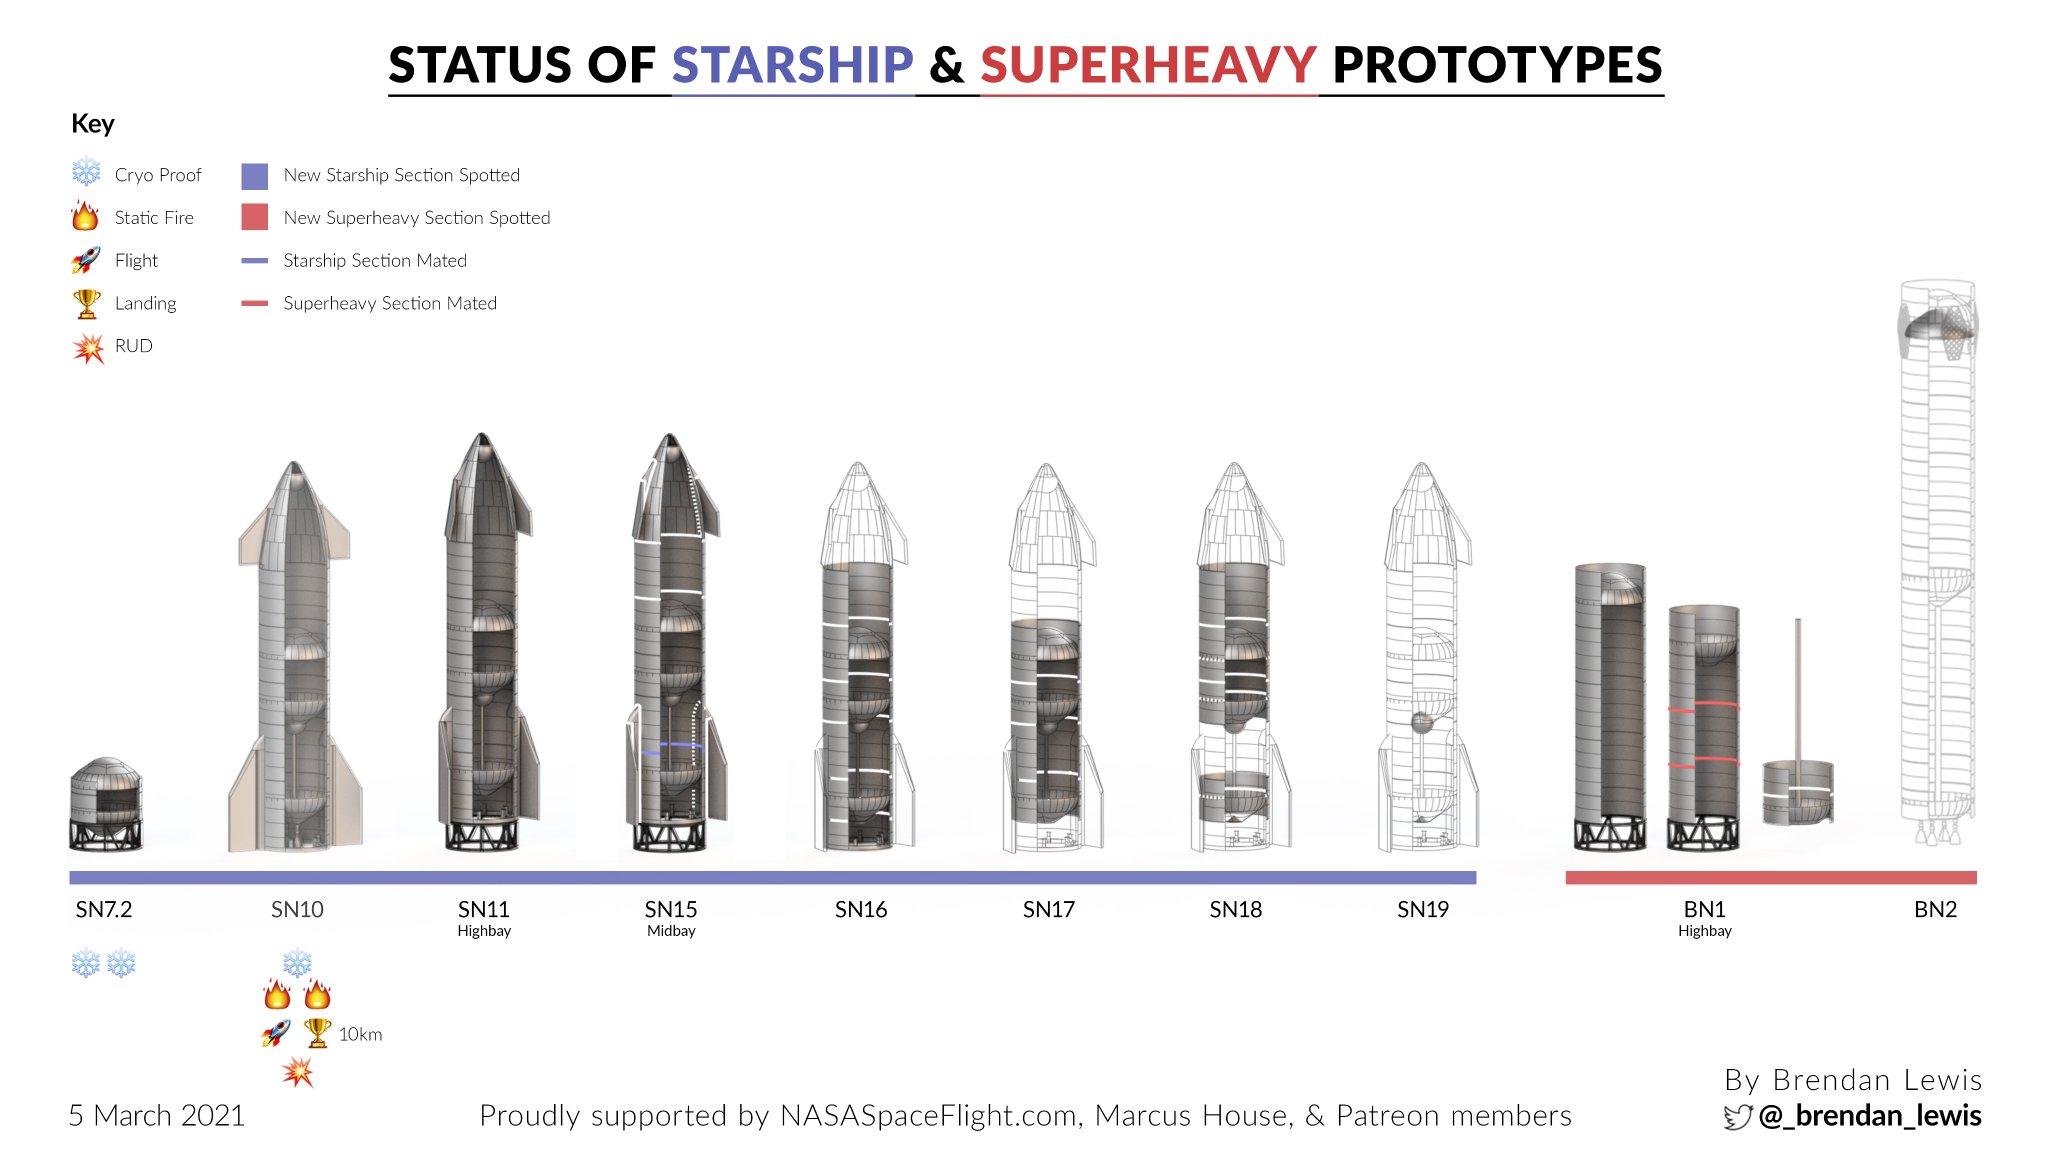 Brendan On Twitter The Current Status Of Spacex S Starship Superheavy Prototypes 5th March 2021